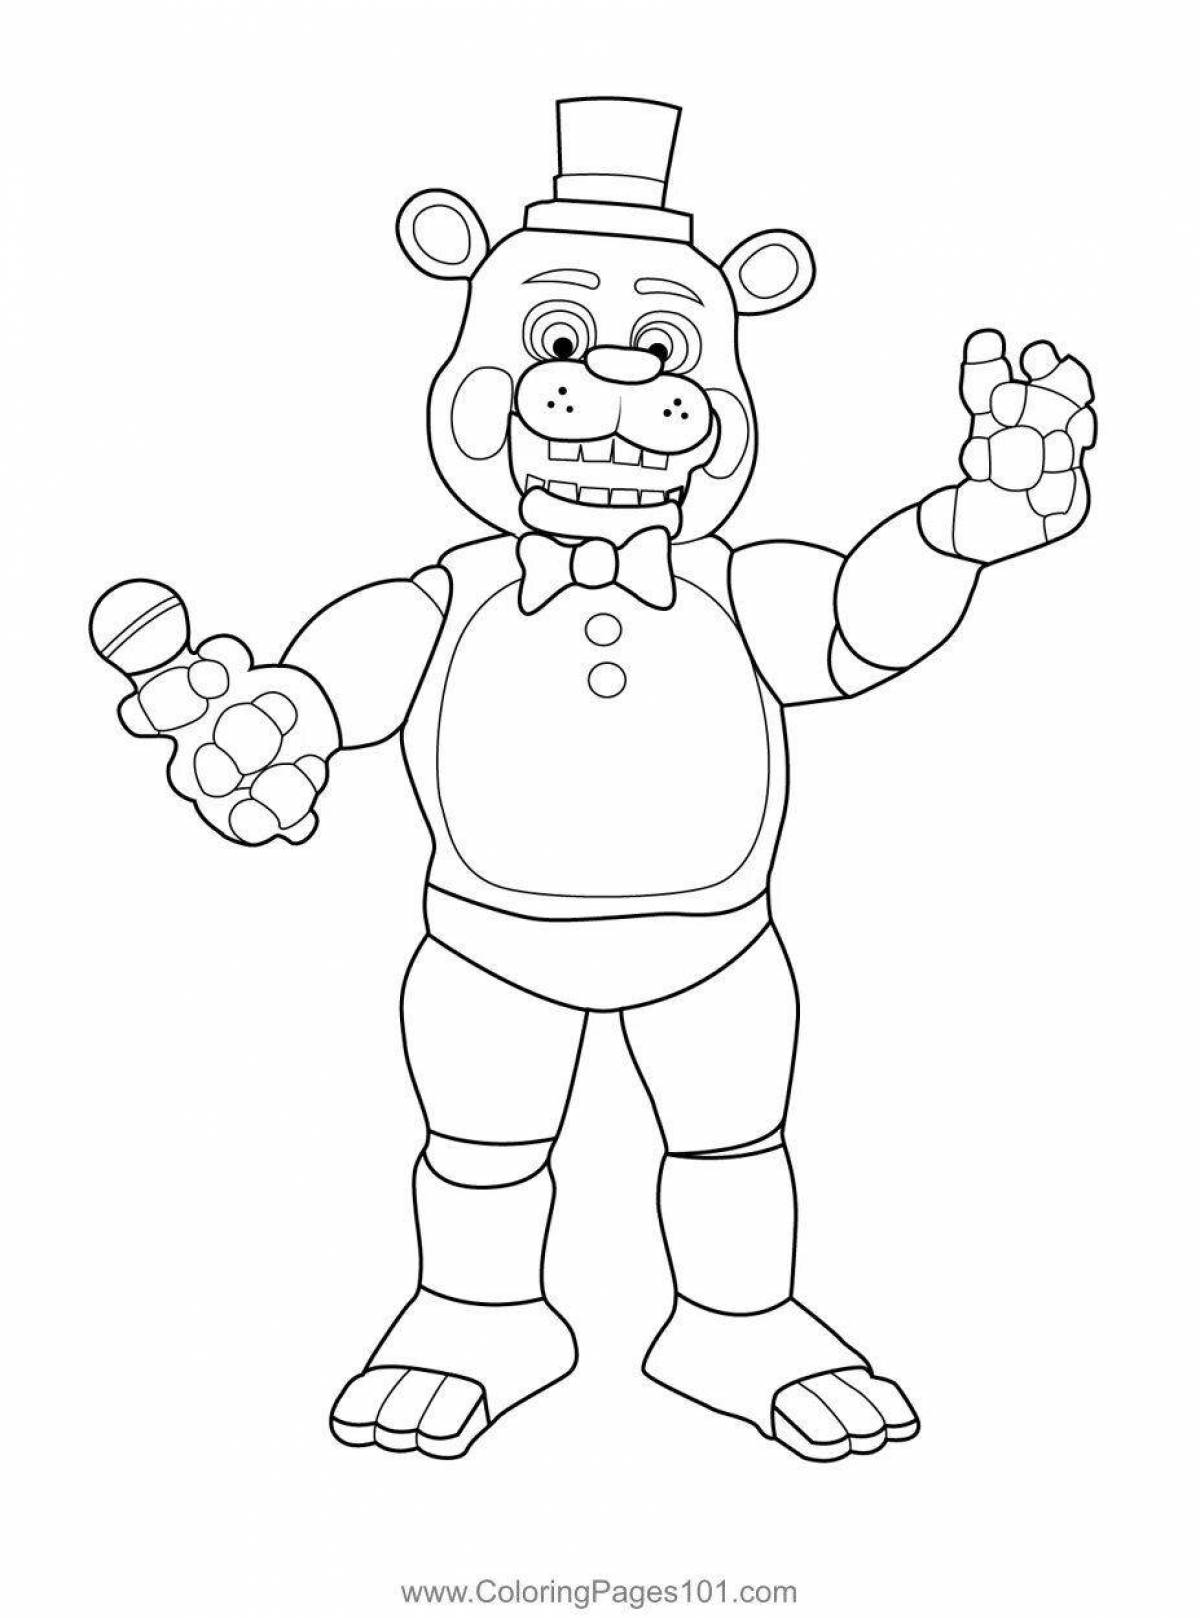 Glowing golden freddy coloring book